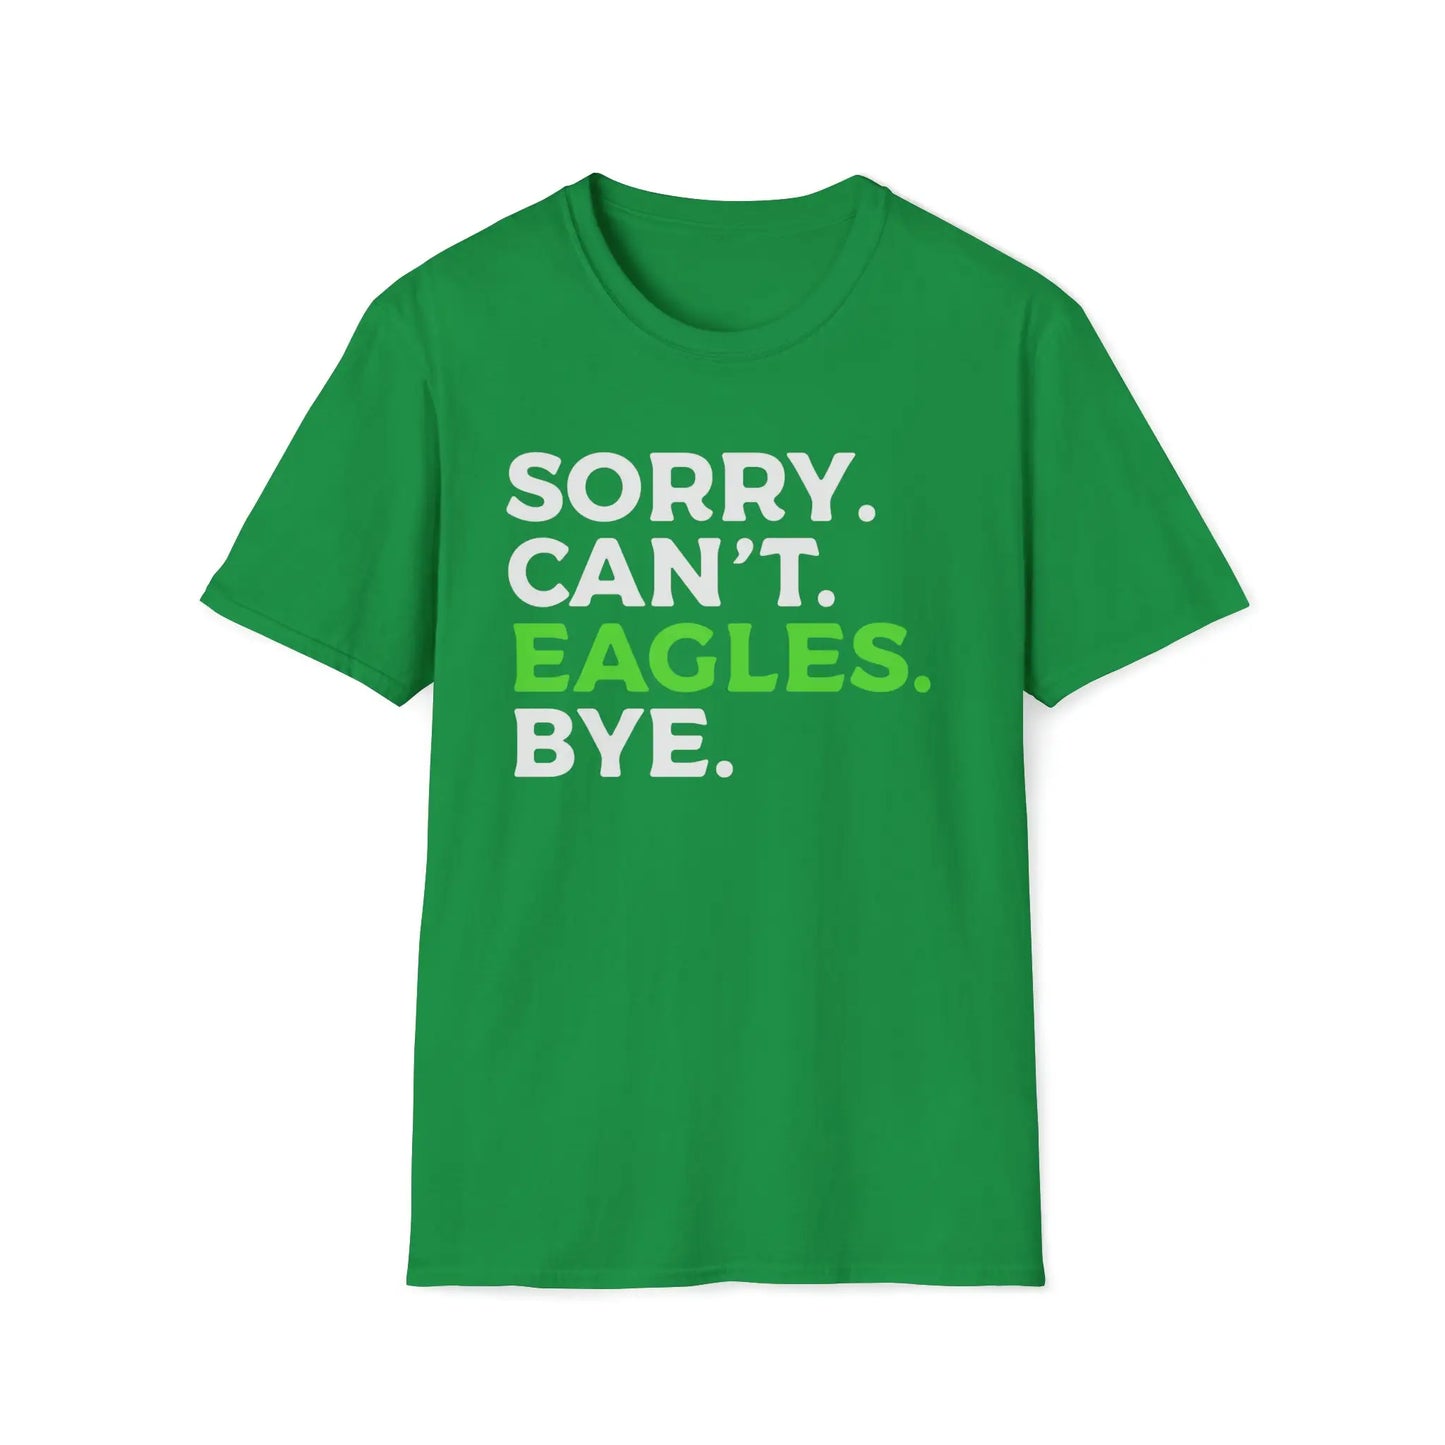 Sorry Can't Eagles Bye Women's T-Shirt - Wicked Tees